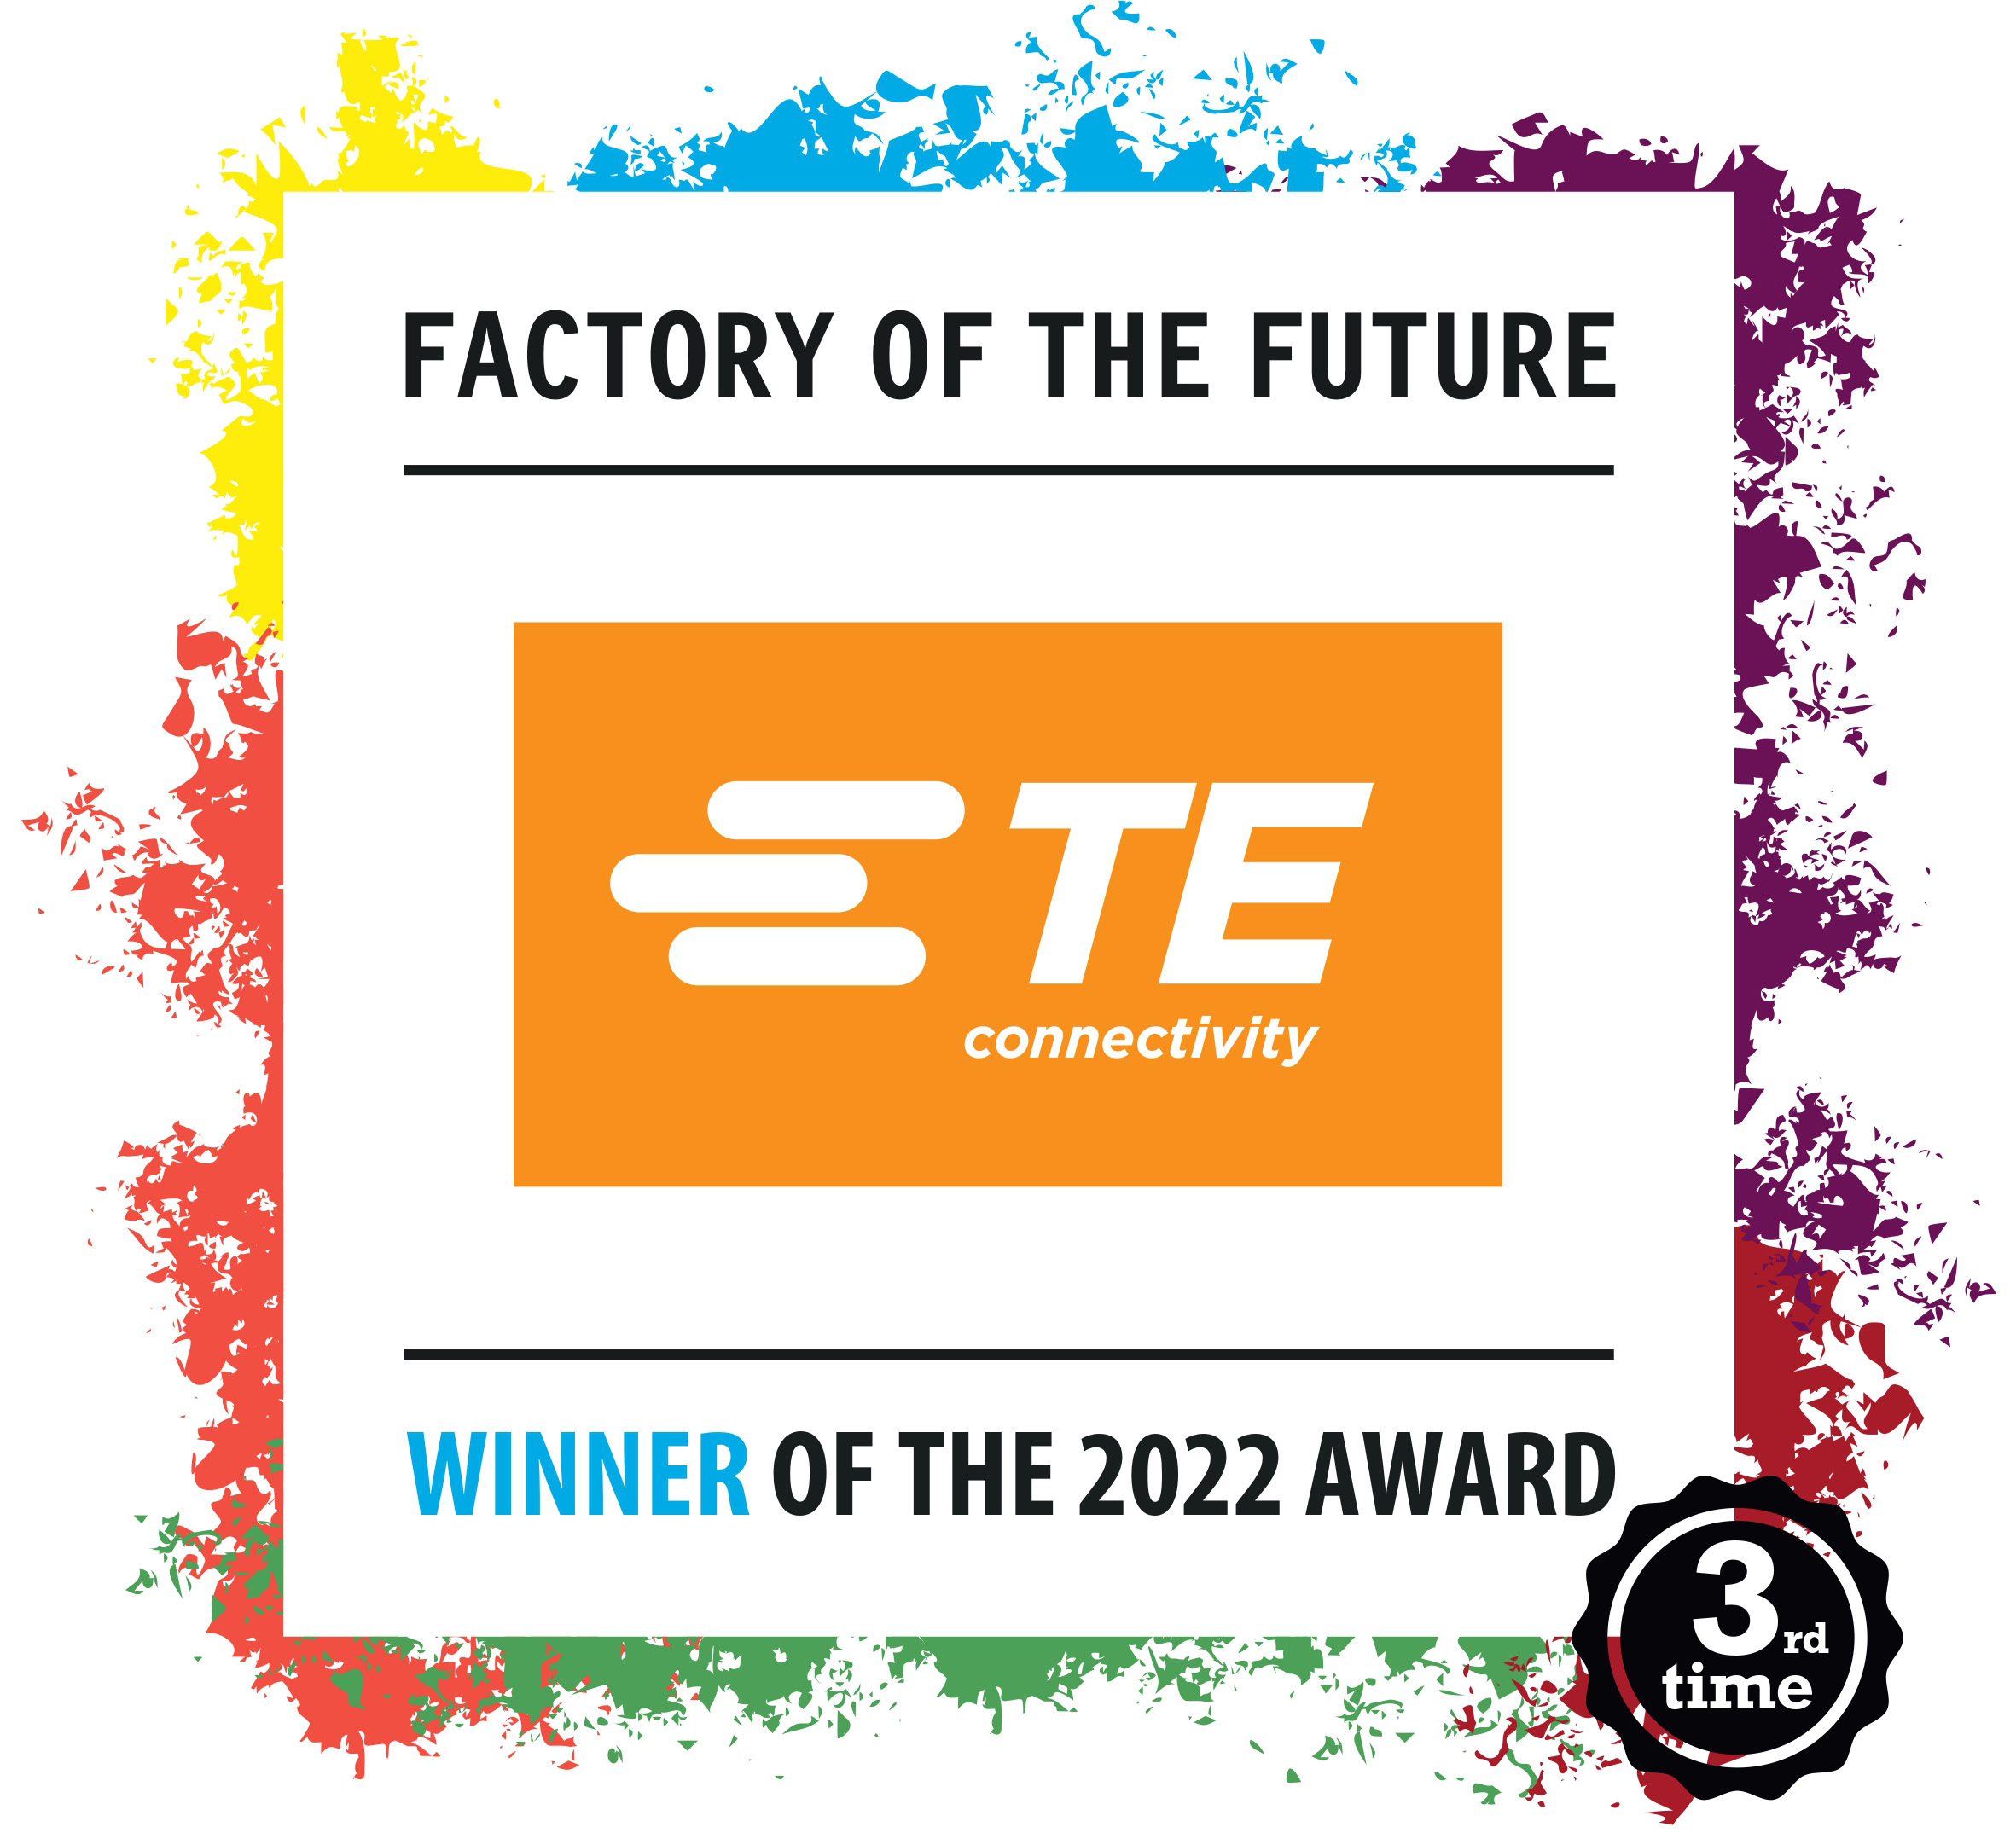 Factory of the future